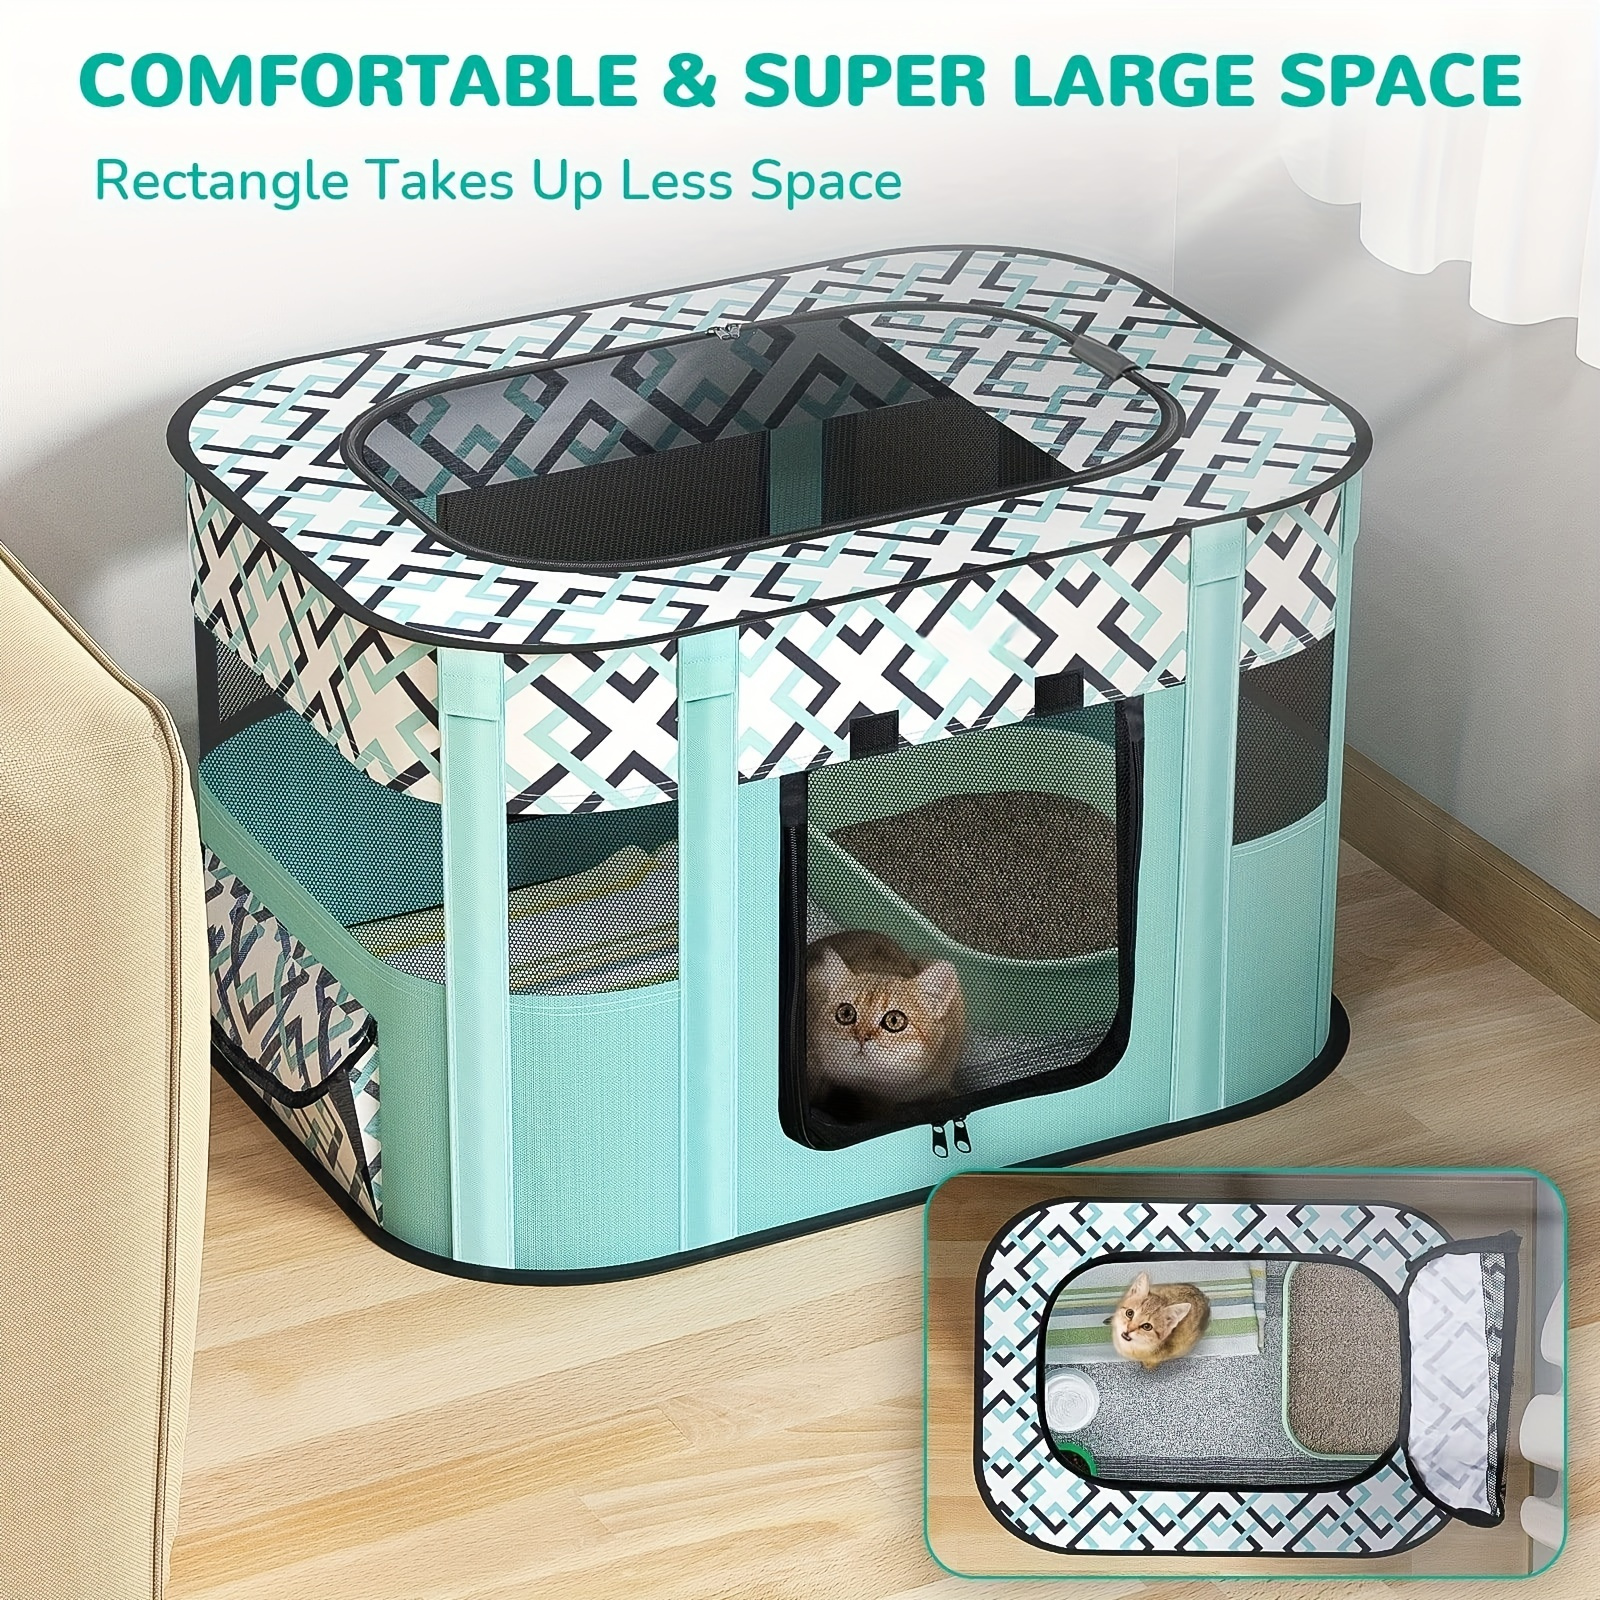 

Extra Large Portable Pet Playpen With Storage Bag, Comfortable & Spacious Mesh Dog Kennel For Indoor/outdoor, Ideal For Medium/large Dogs, Cats, Rabbits